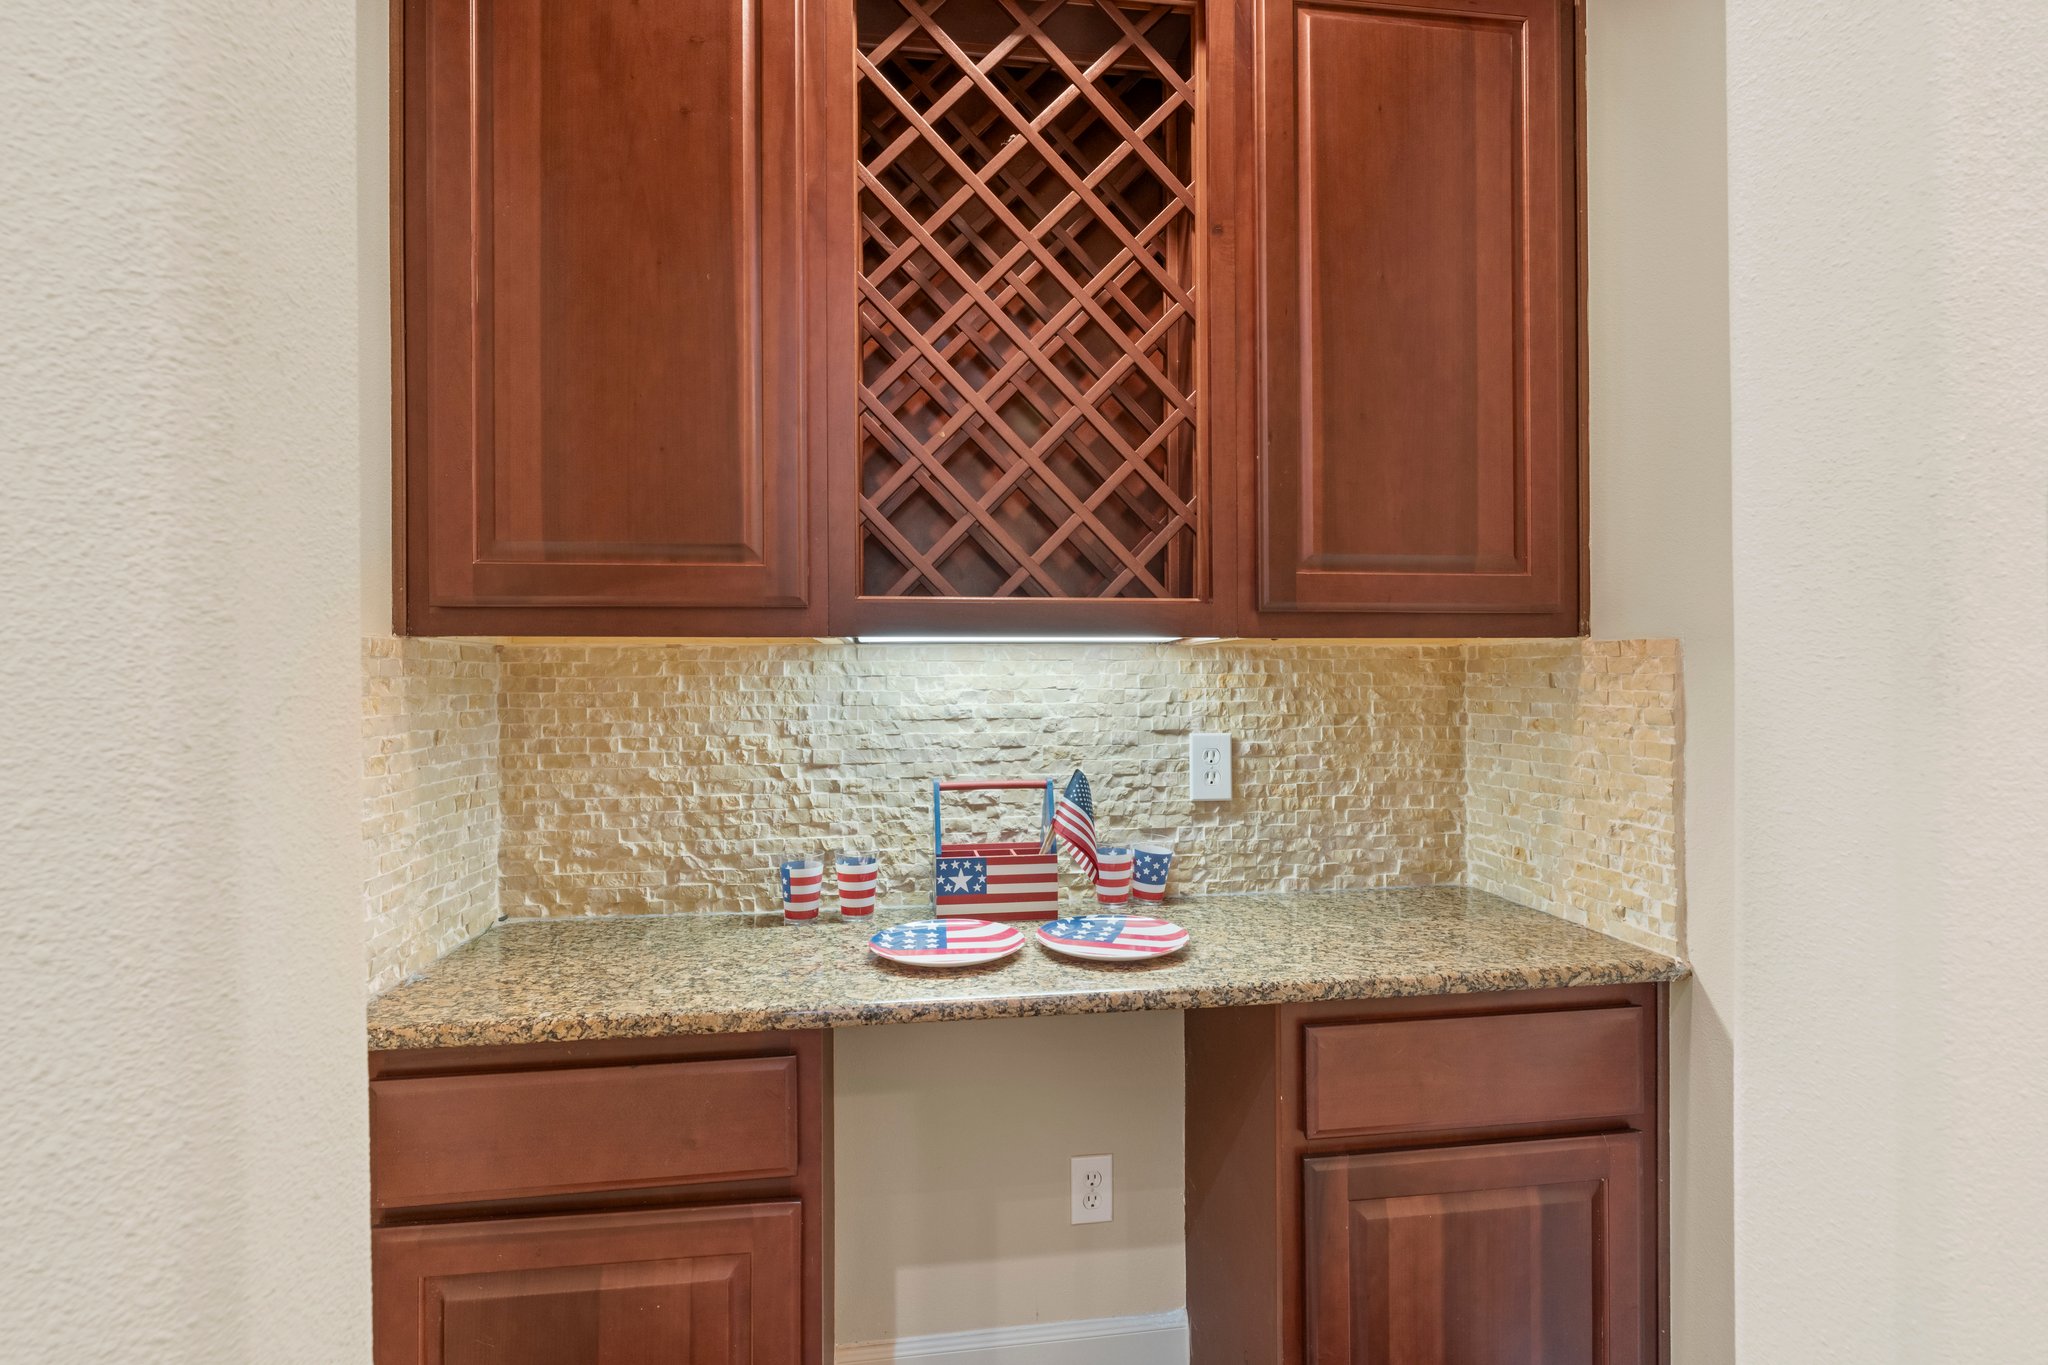 Butler’s Pantry off of entry way with wine rack, storage, granite countertop as well as space for mini frig.